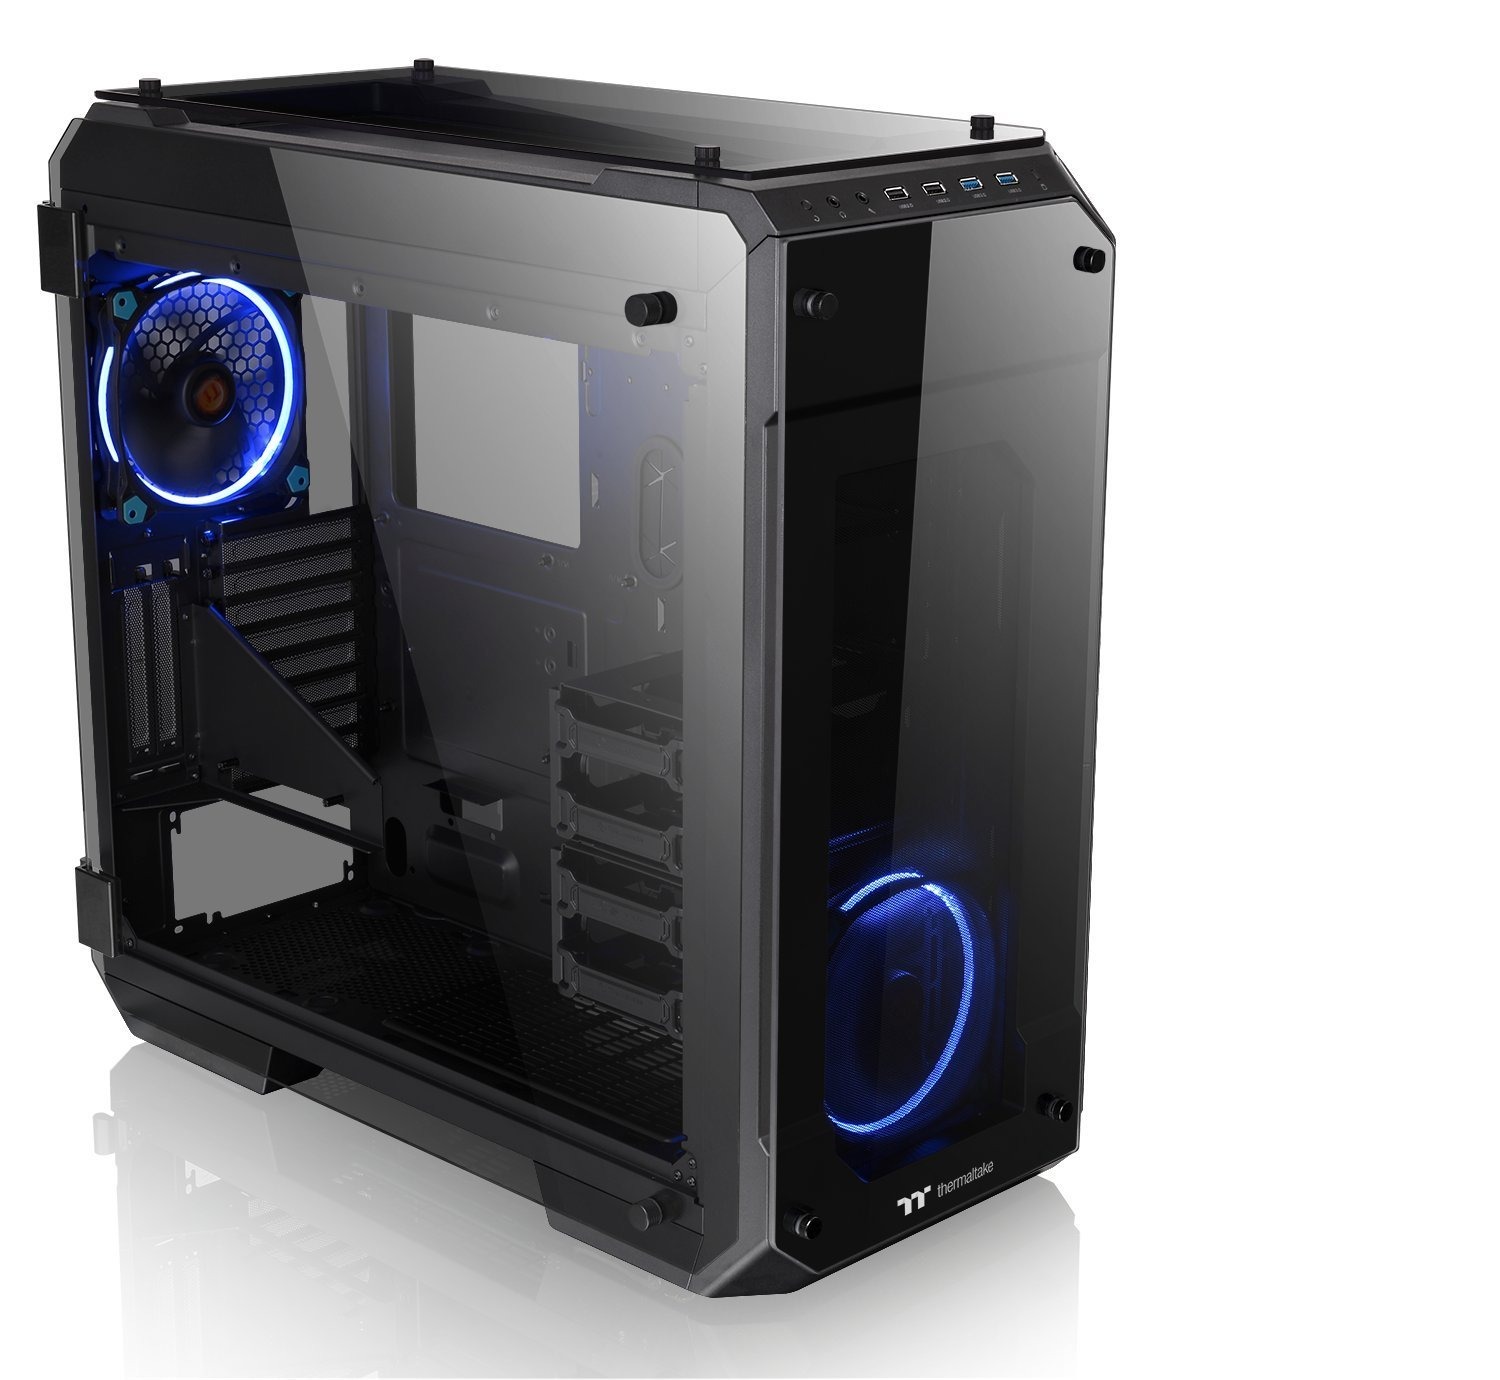 ... SATILIK ... " SIFIR " Thermaltake View 71 4-Sided Tempered Glass Gaming Full Tower Computer Case